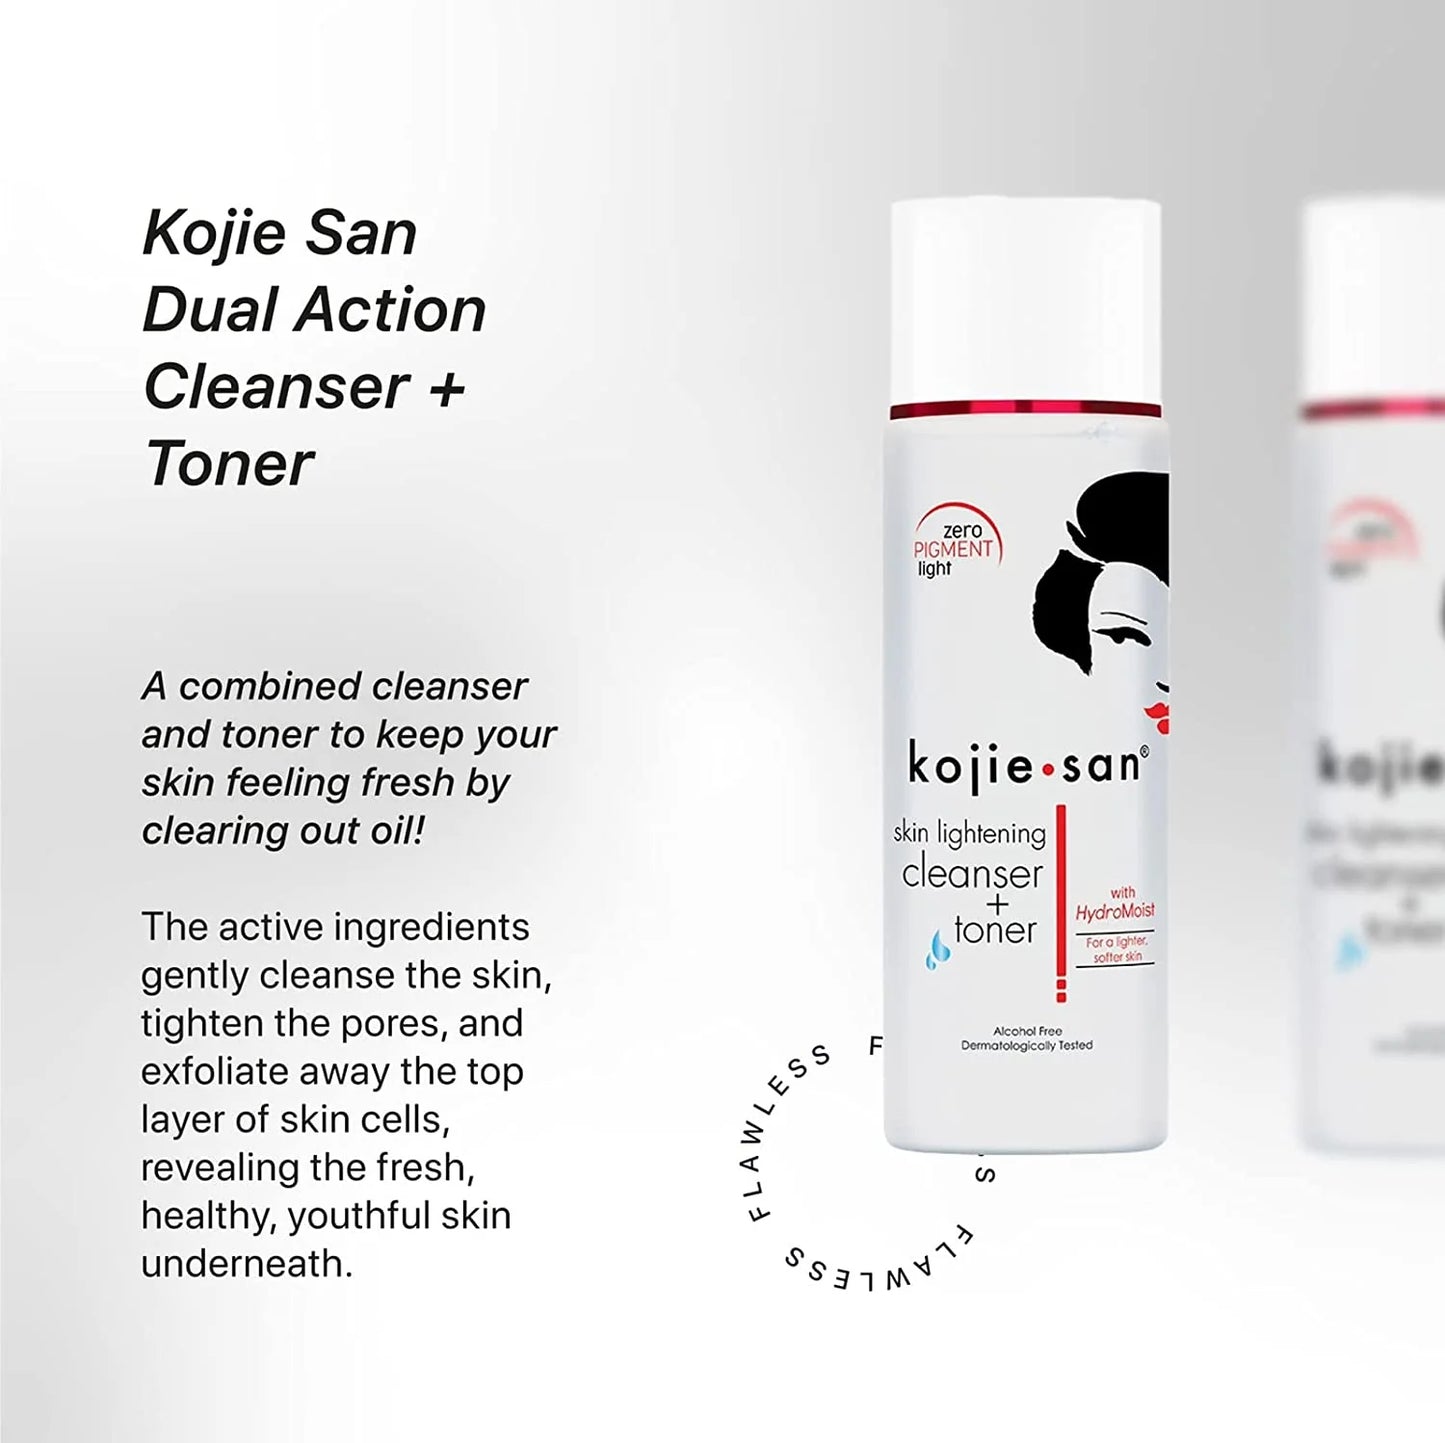 Kojie San Combined Cleanser and Toner - Dual Action